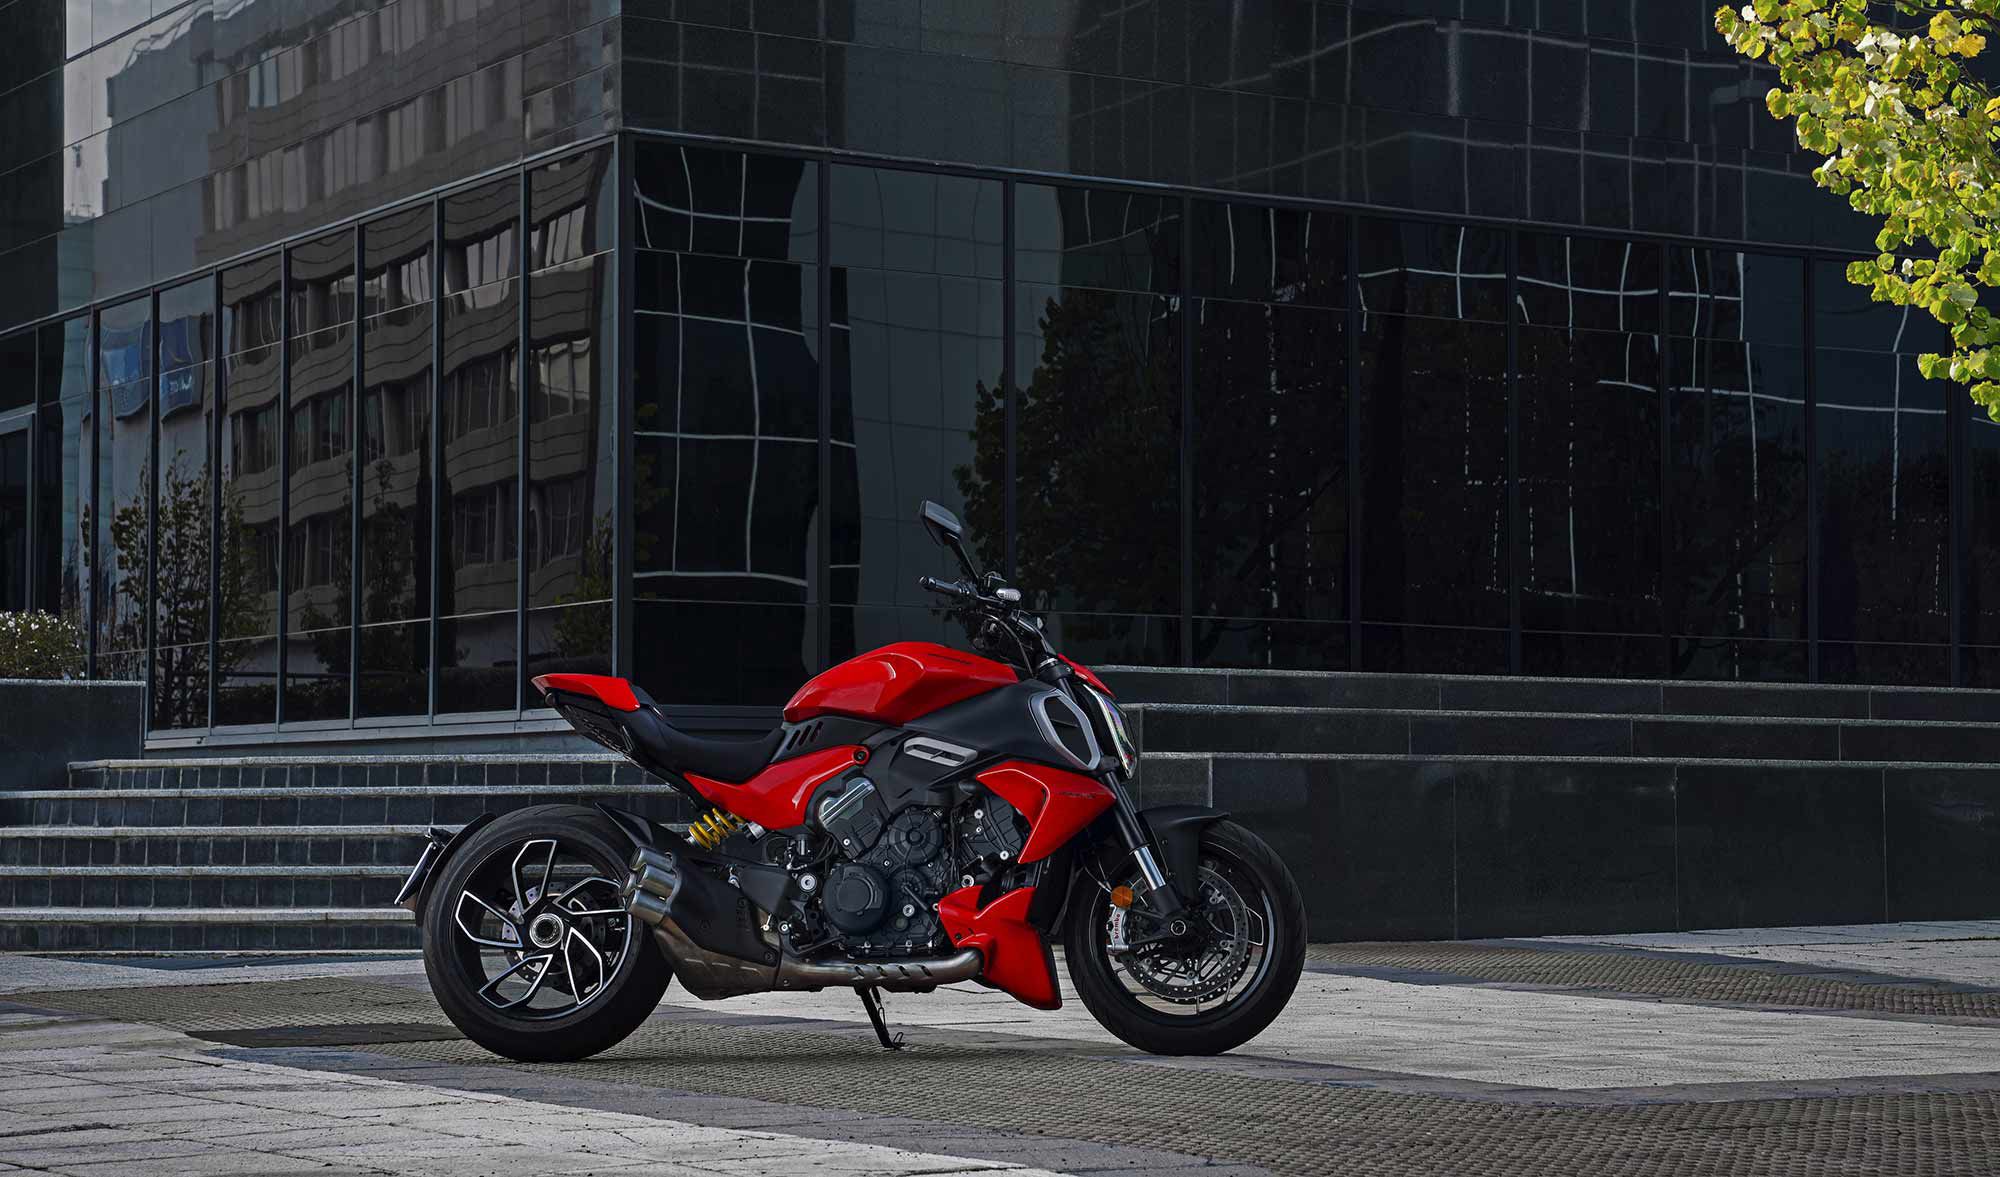 The 2023 Ducati Diavel gets four cylinders and loses some weight.